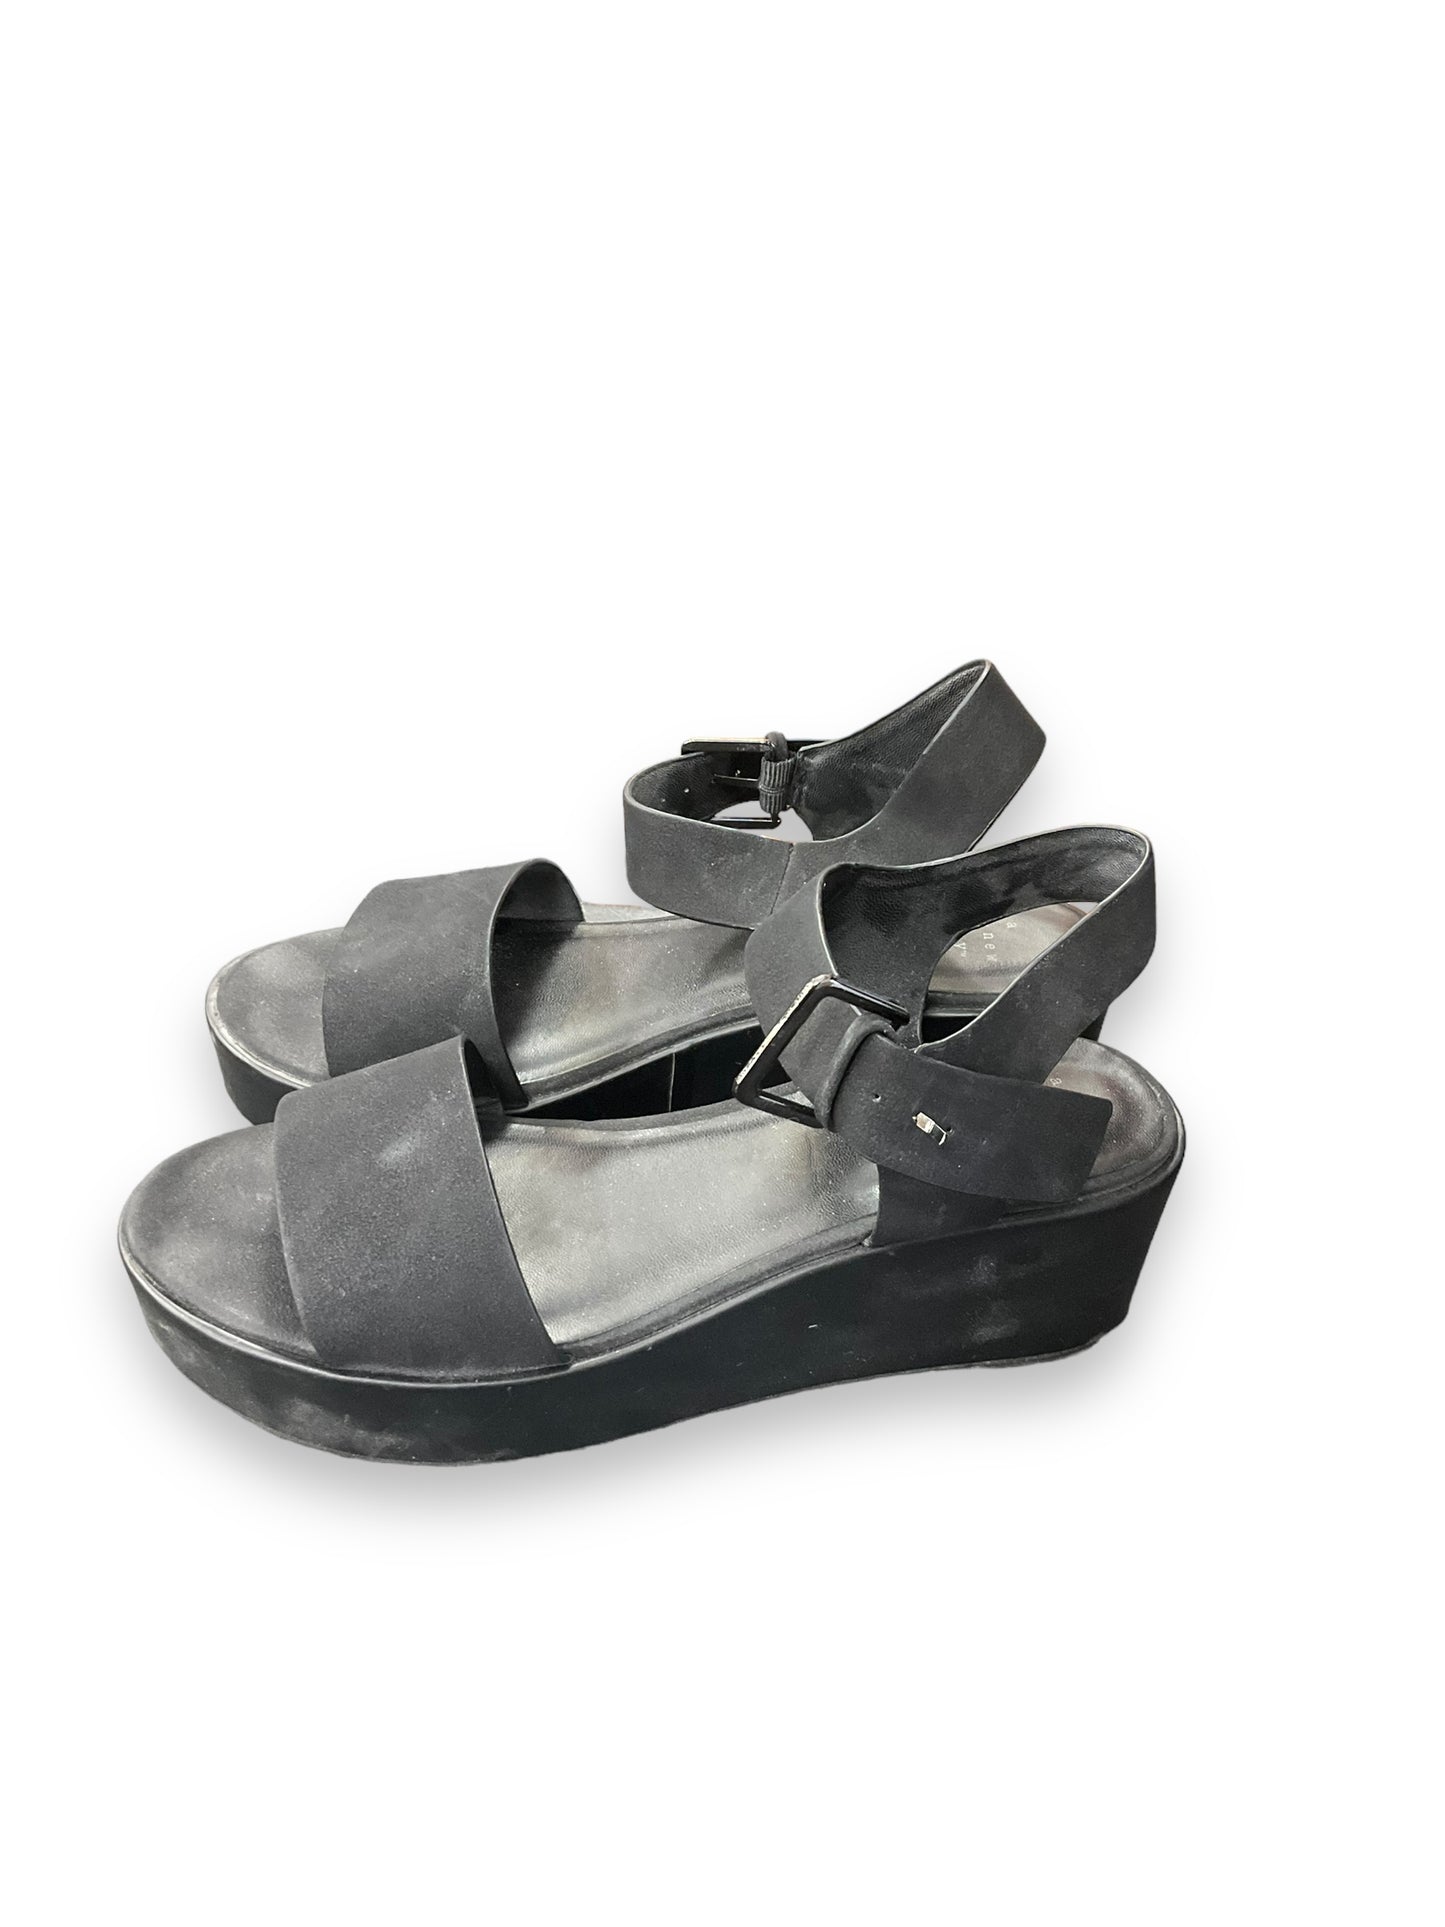 Sandals Heels Platform By A New Day  Size: 8.5